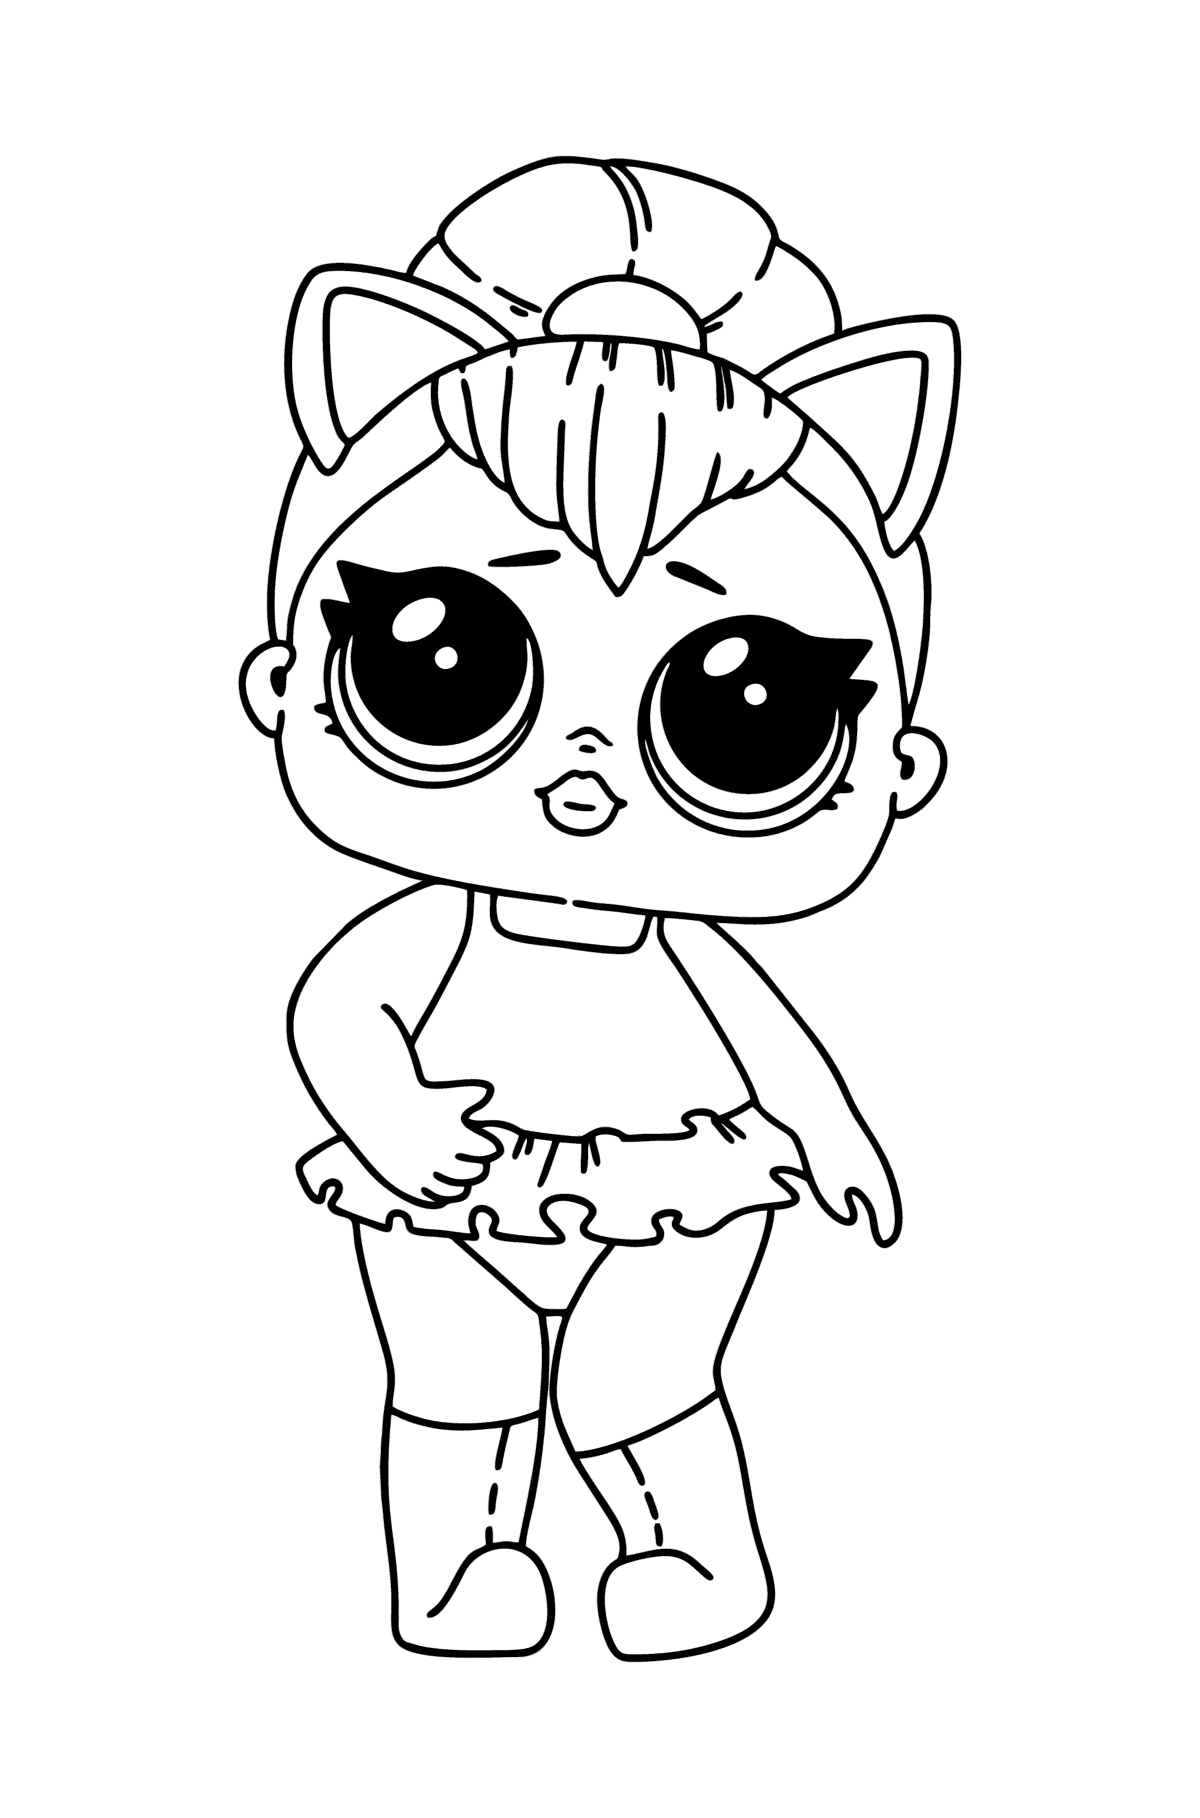 LOL Surprise Kitty Queen coloring page - Coloring Pages for Kids